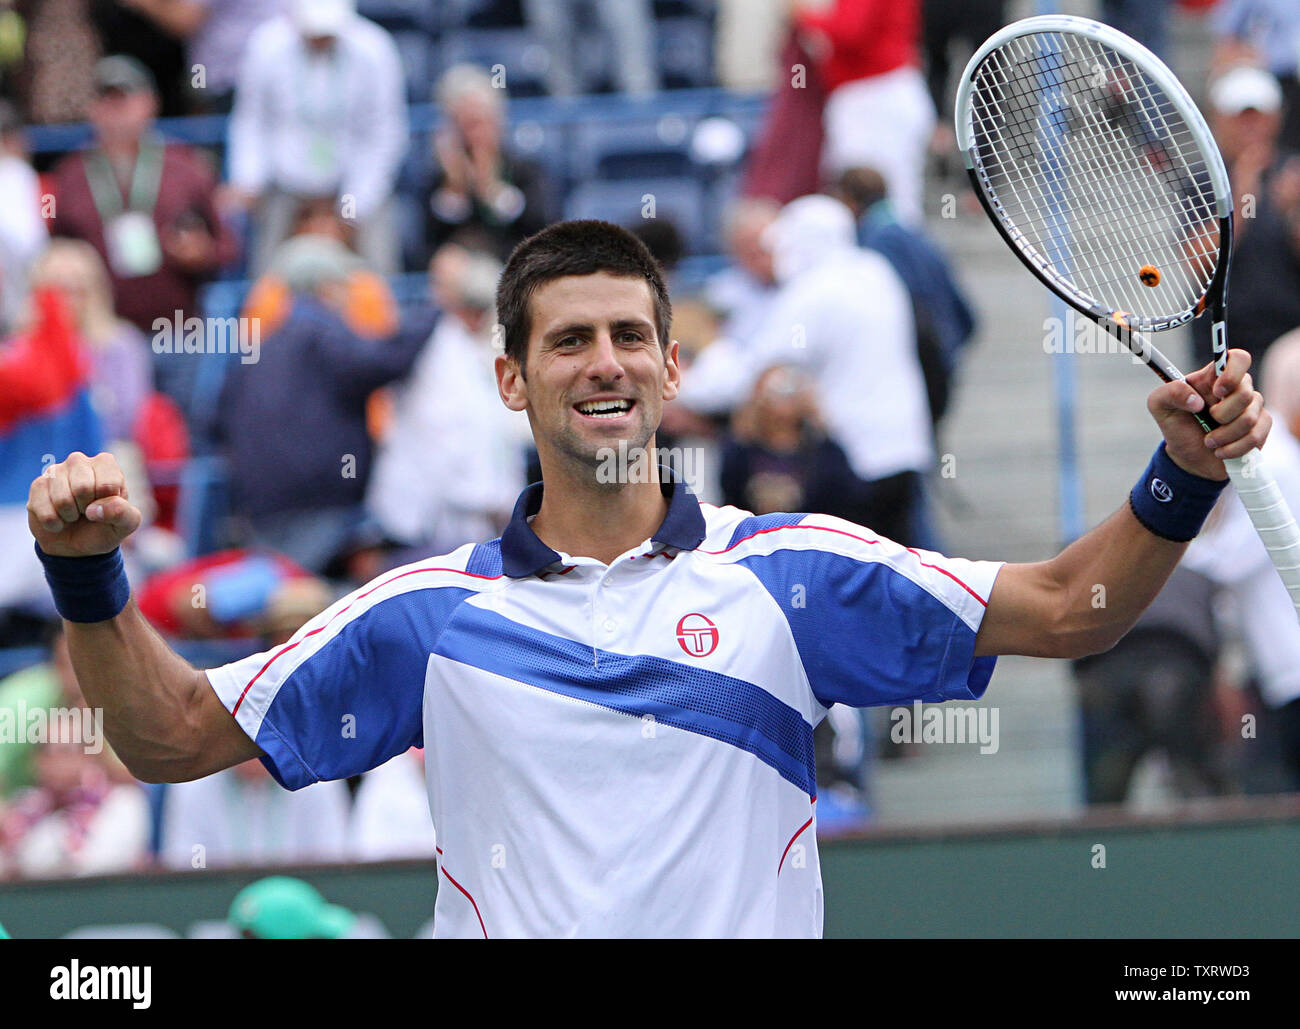 Serbian Novak Djokovic reacts after winning his mens final match against Spaniard Rafael Nadal at the BNP Paribas Open in Indian Wells, California on March 20, 2011.  Djokovic defeated Nadal 4-6, 6-3, 6-2 to win the tournament.   UPI/David Silpa Stock Photo